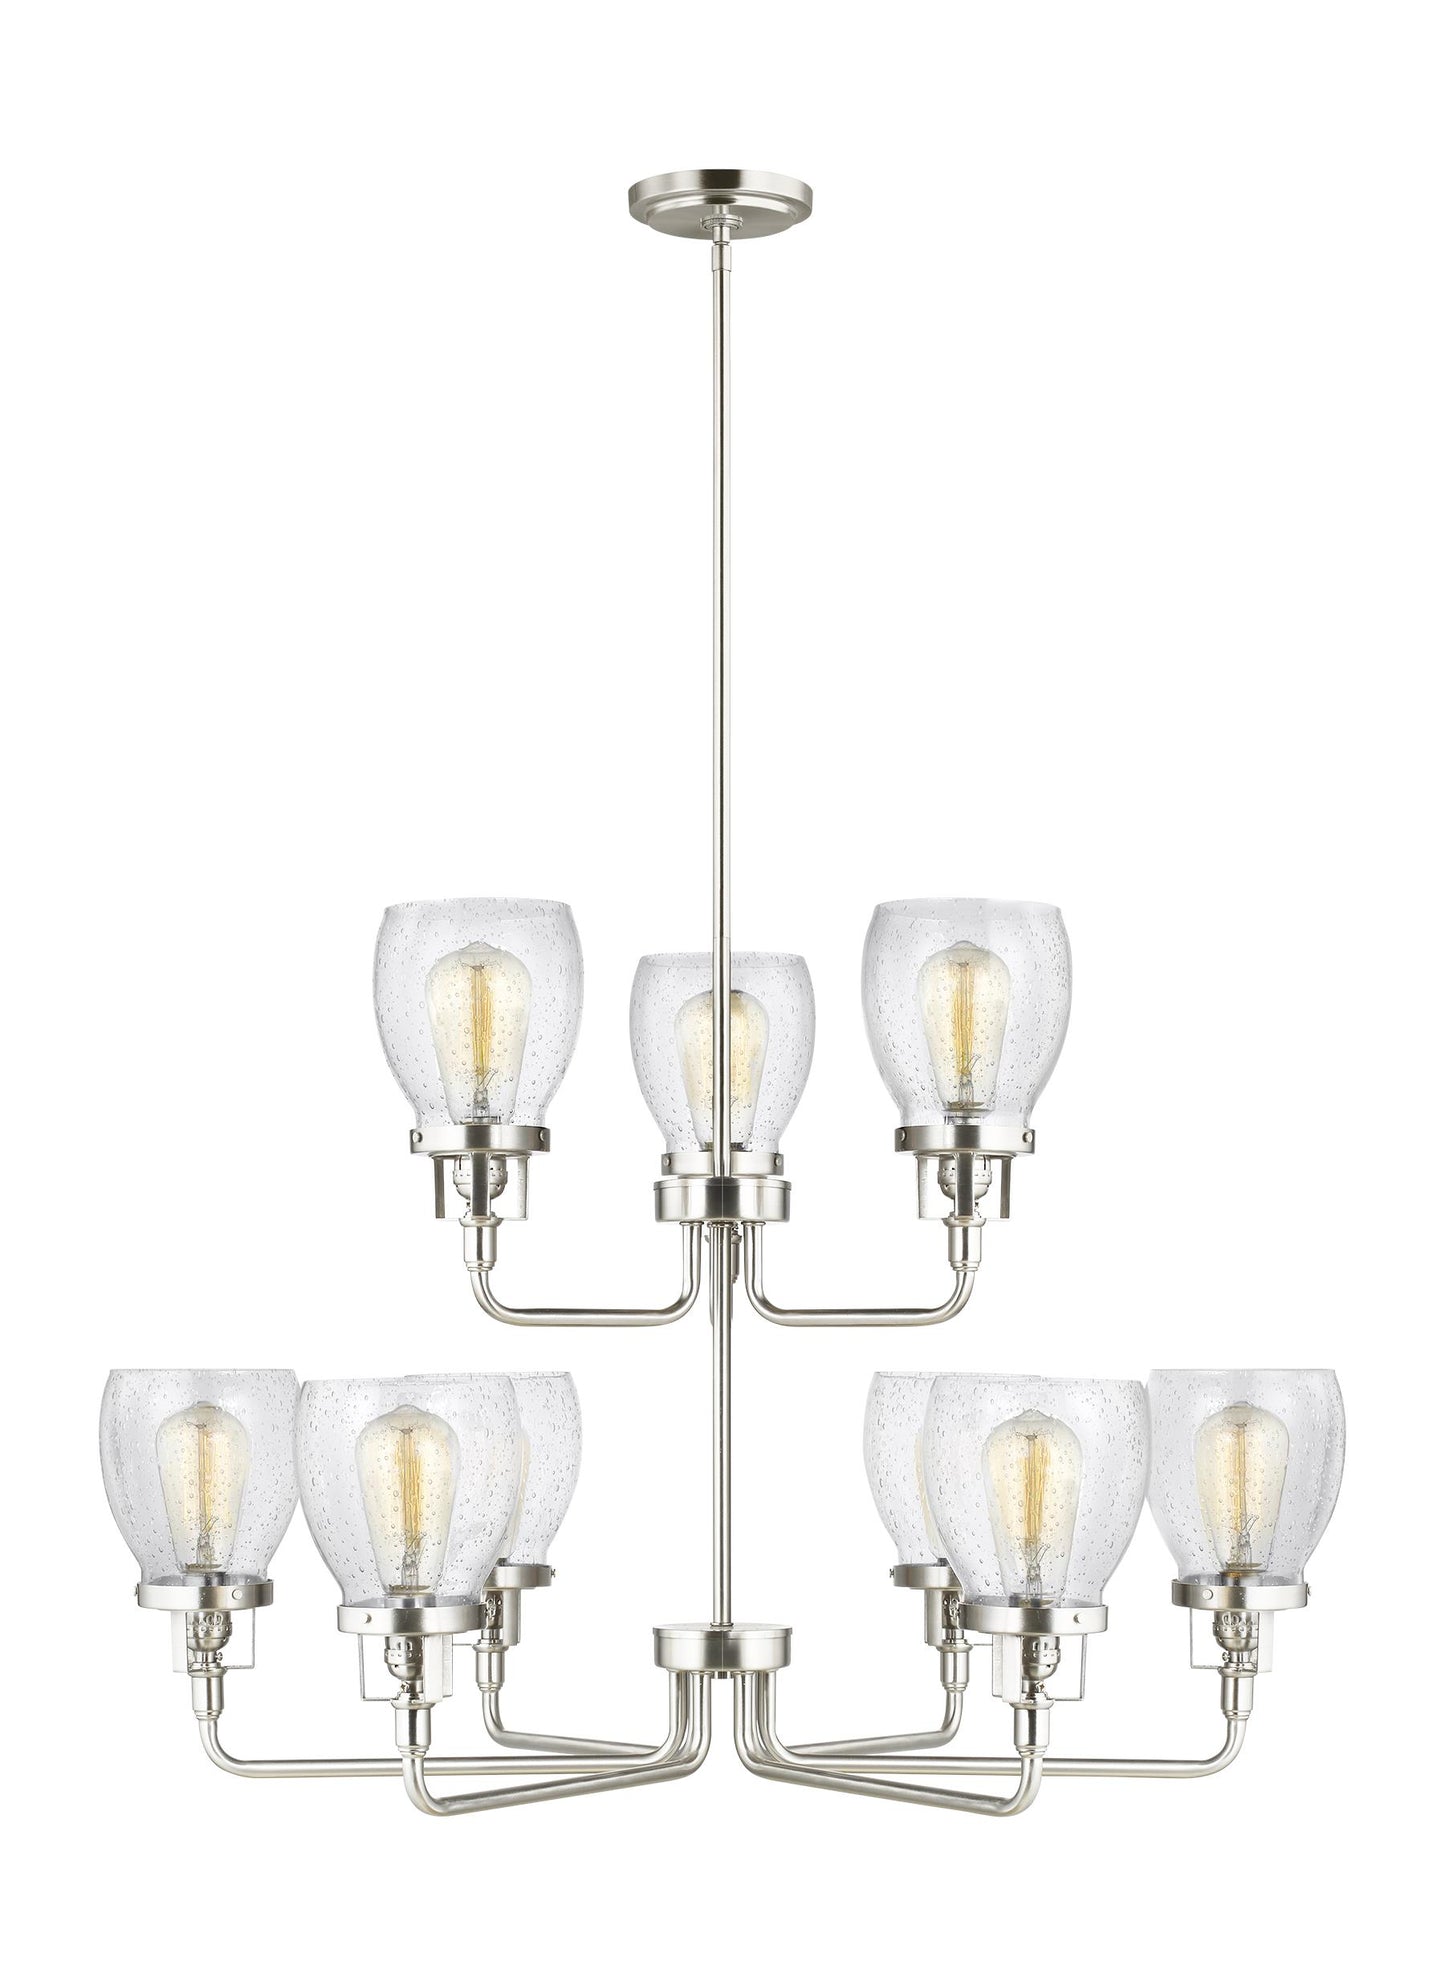 Belton transitional 9-light indoor dimmable ceiling chandelier pendant light in brushed nickel silver finish with clear se...